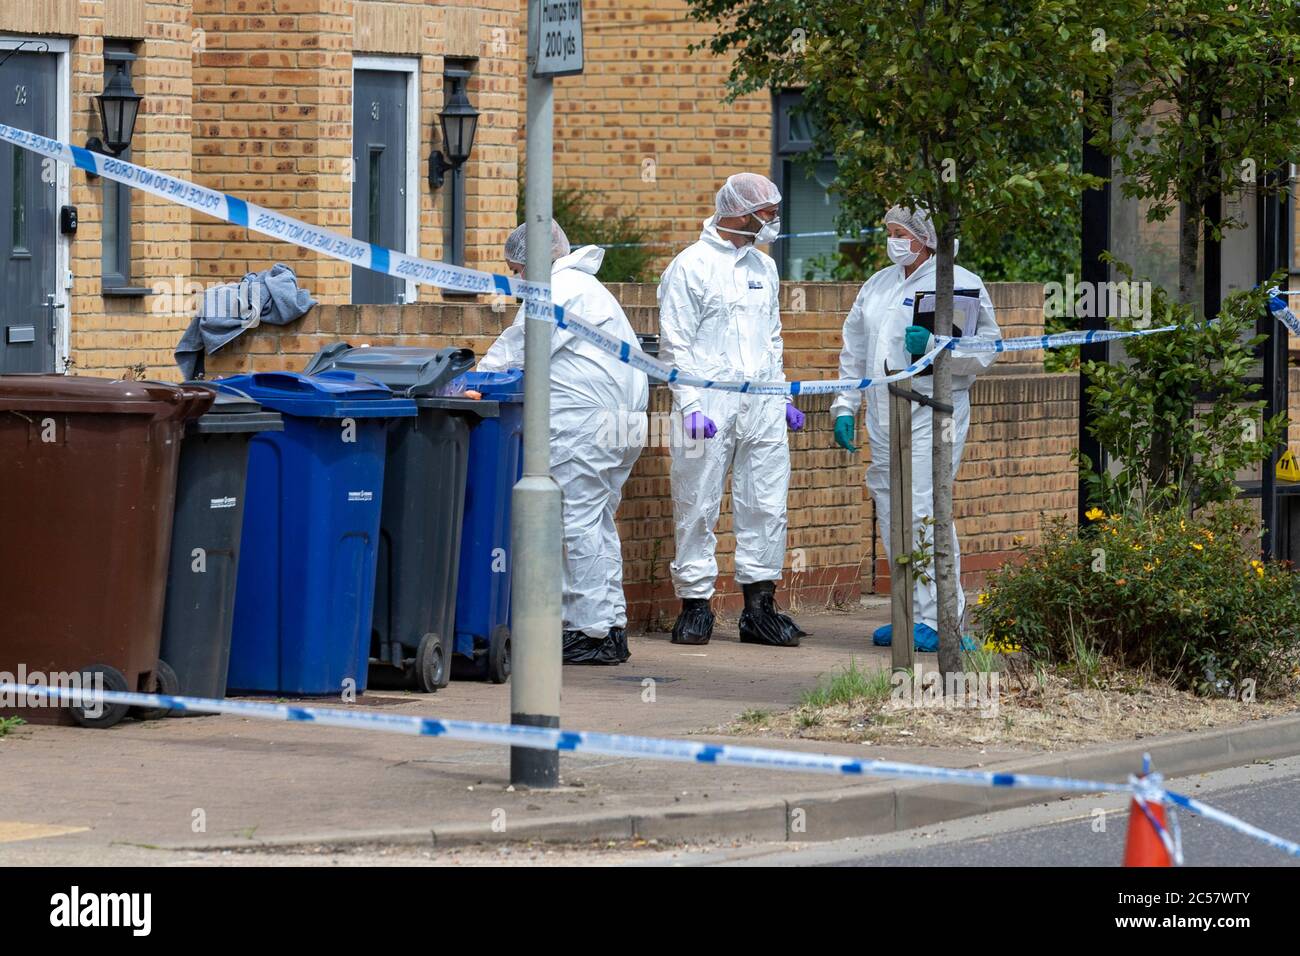 Essex, UK. 1st July 2020. Three men have been arrested on suspicion of attempted murder in South Ockendon after a man was attacked with a 'large knife' early this morning. Blood can be seen on a nearby bus stop and a silver/grey Vauxhall Astra has been removed from the scene by police. Ricci Fothergill/Alamy Live News Stock Photo